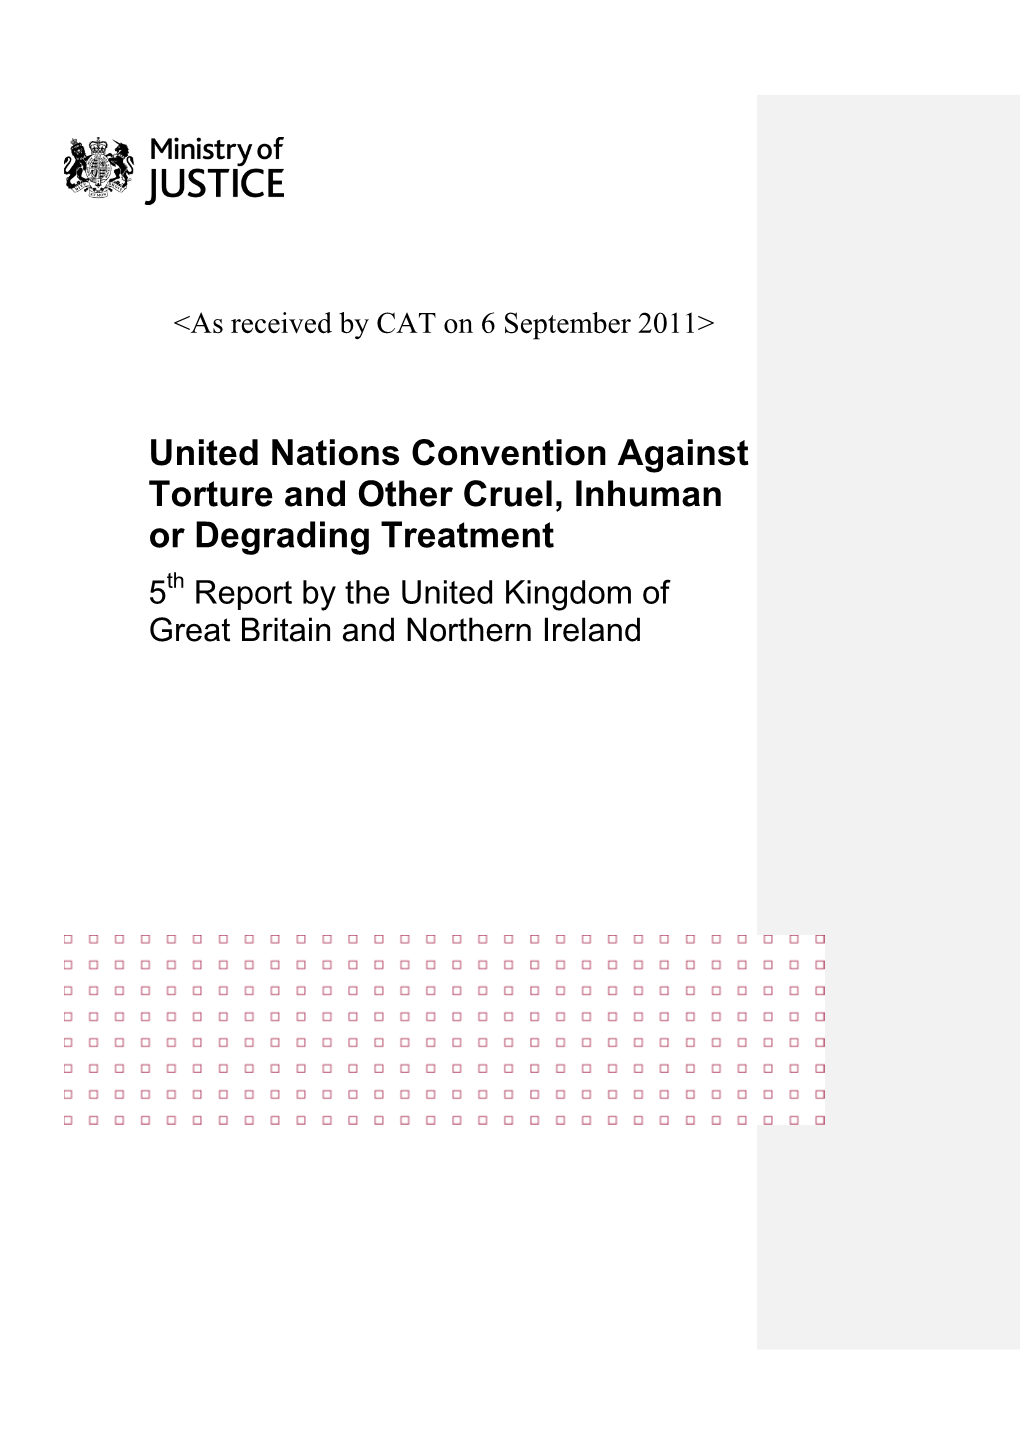 United Nations Convention Against Torture and Other Cruel, Inhuman Or Degrading Treatment 5Th Report by the United Kingdom of Great Britain and Northern Ireland